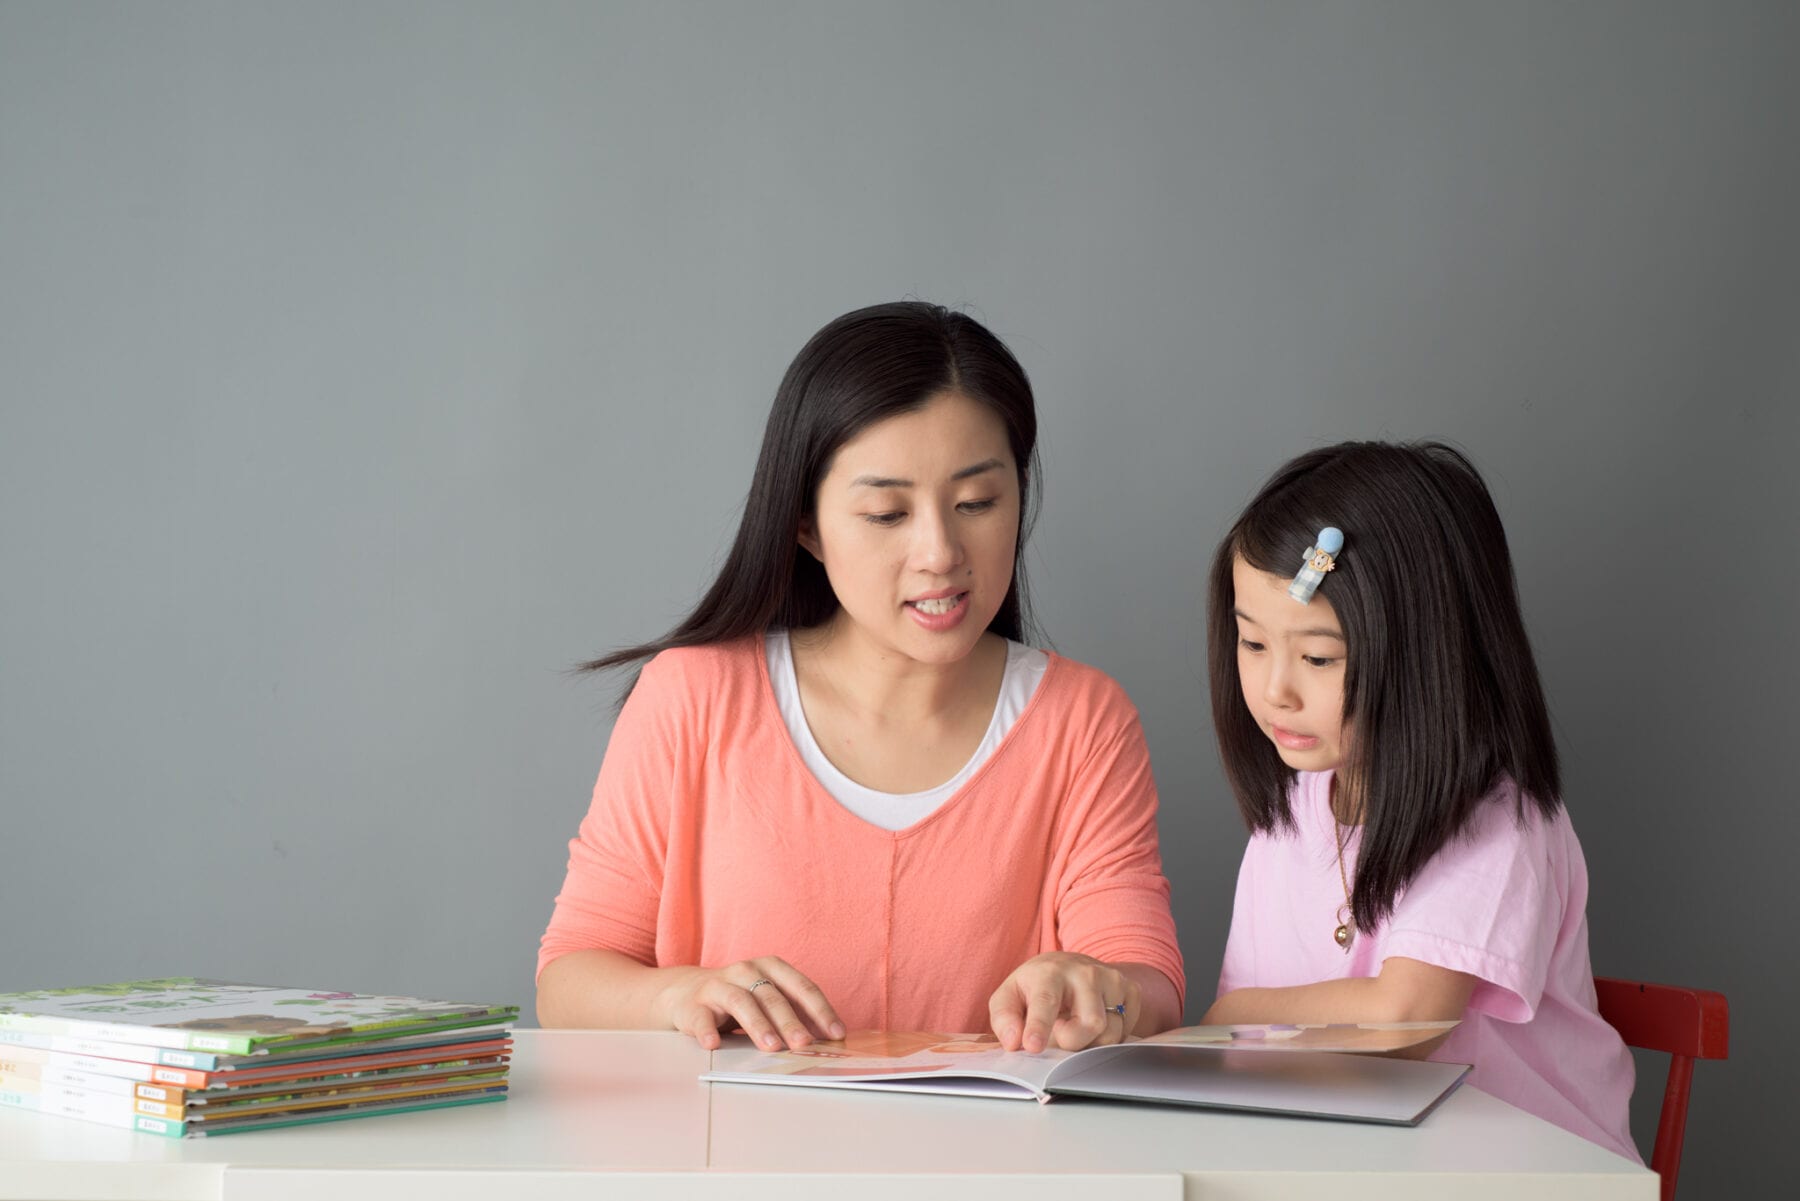 Writing in Chinese characters: 10 tips for teaching young children of how to write Chinese characters